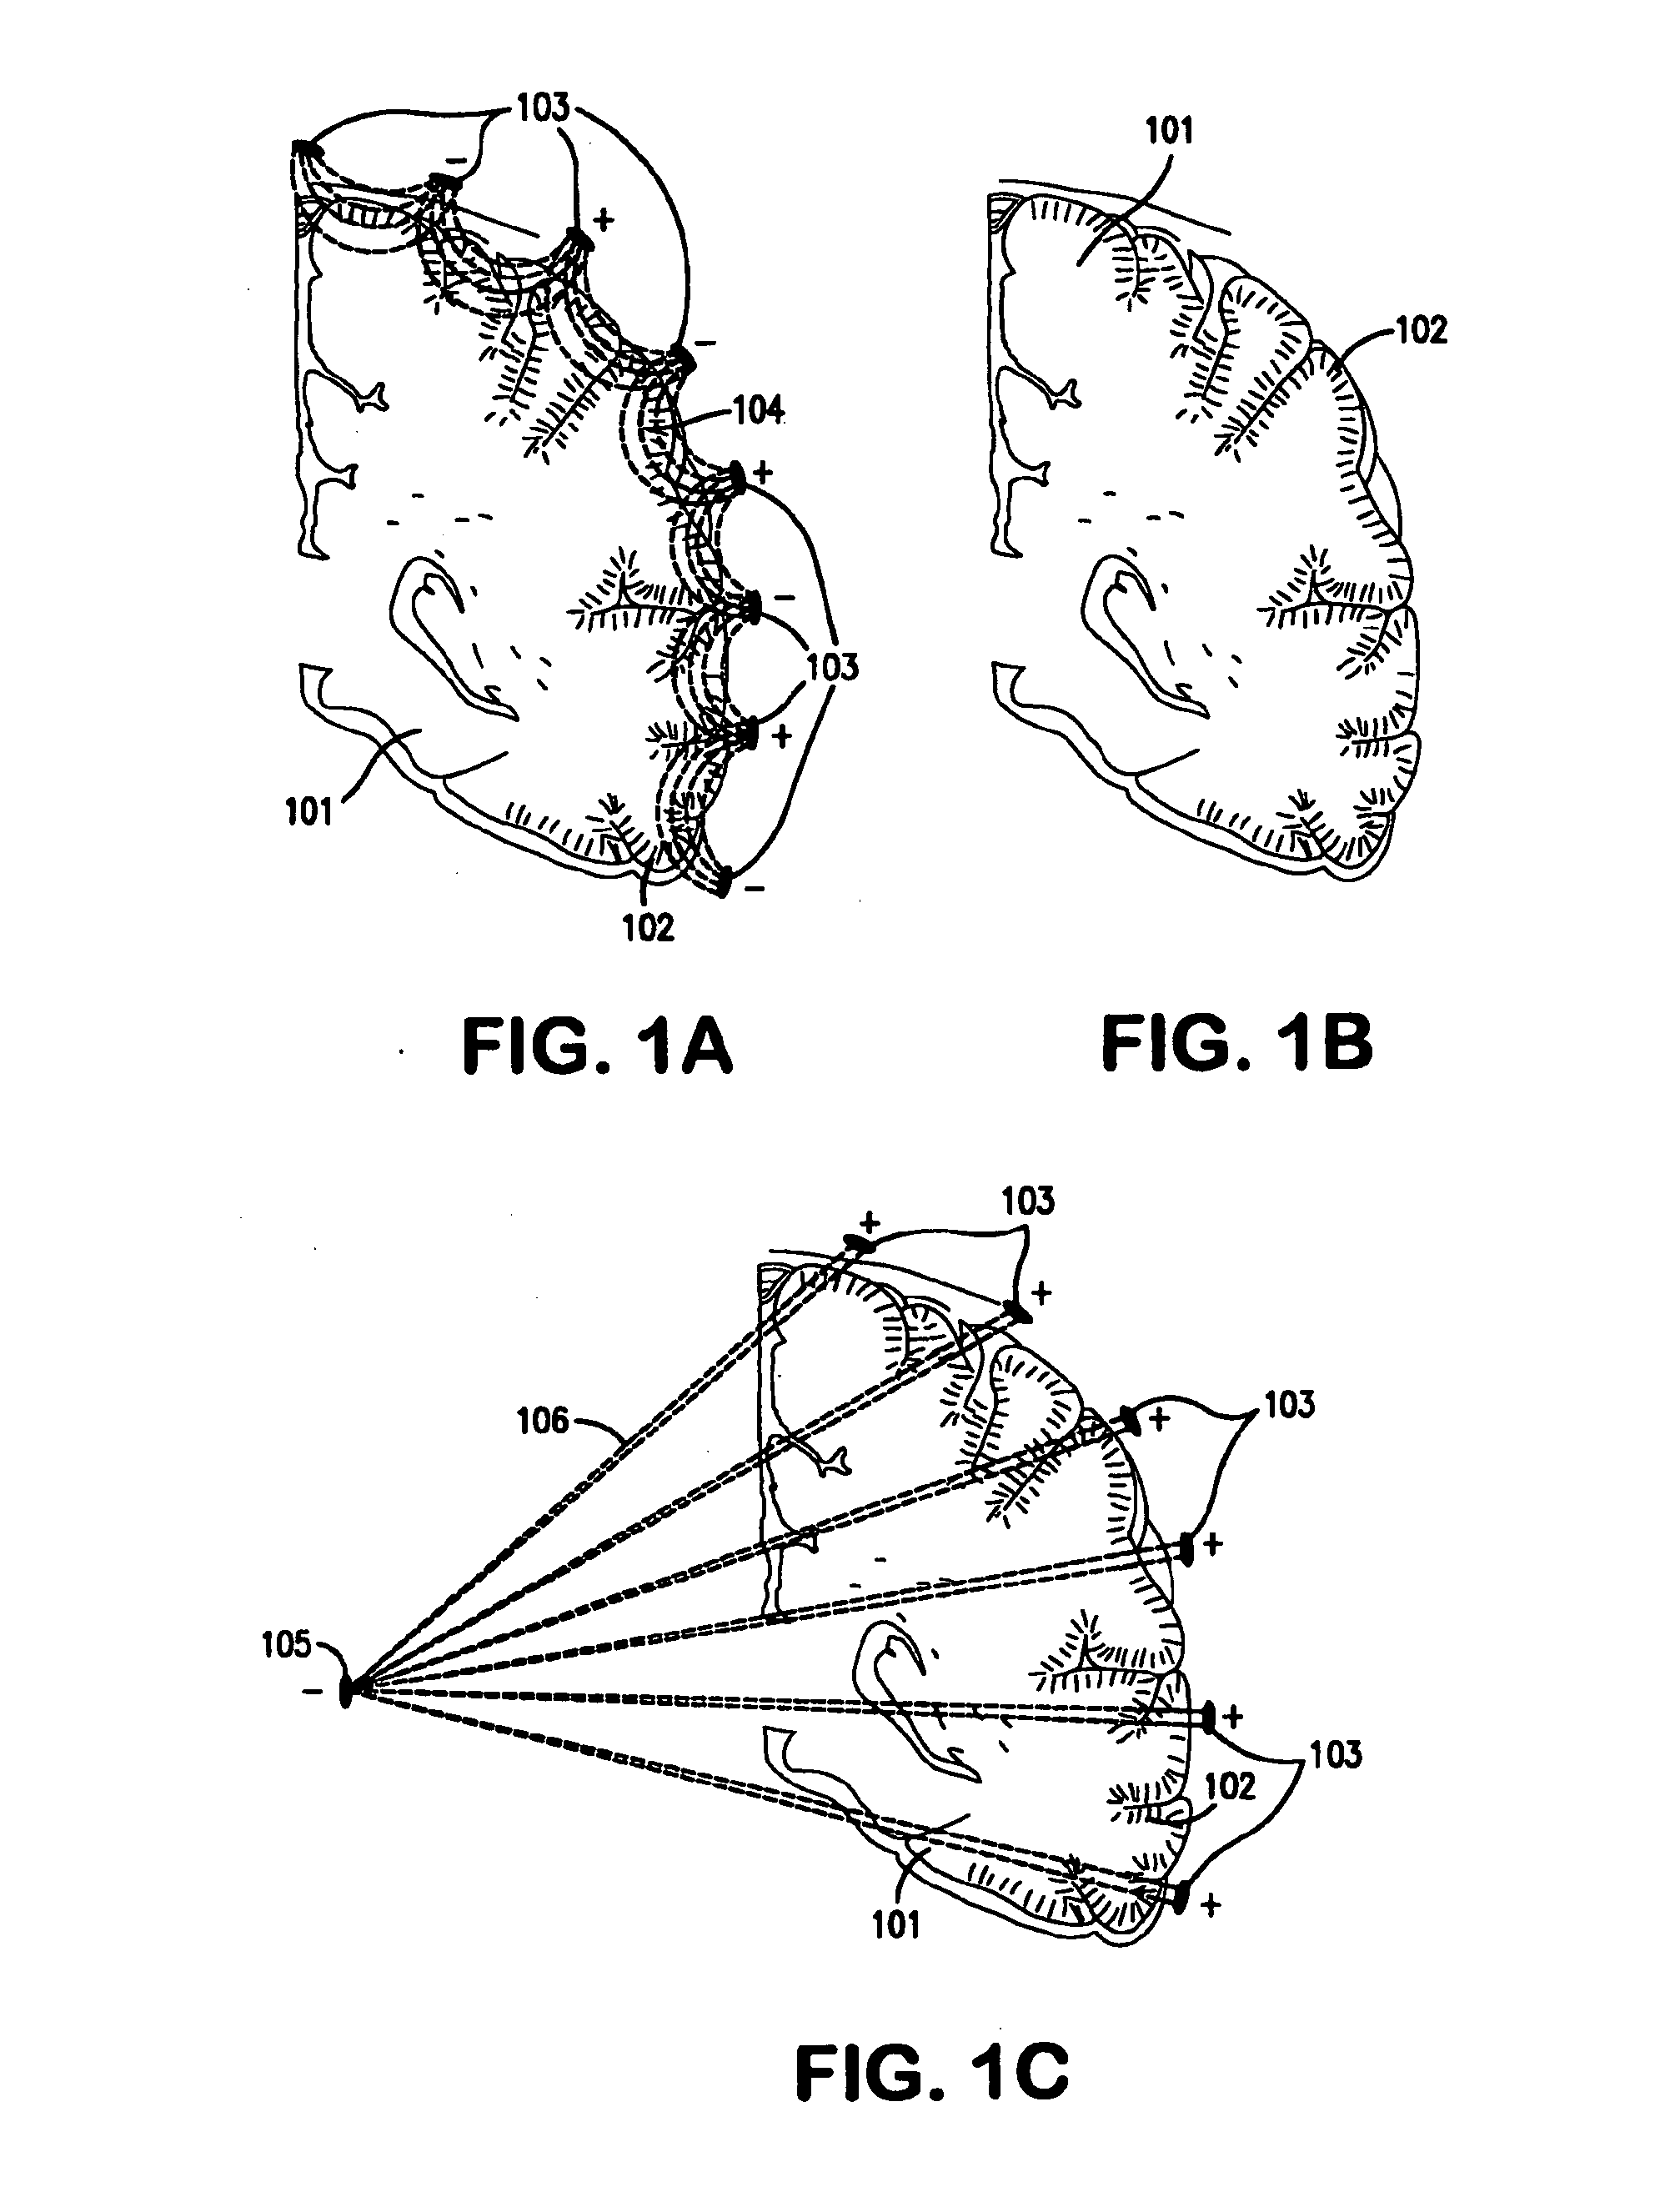 Treatment of neurological disorders via electrical stimulation, and methods related thereto